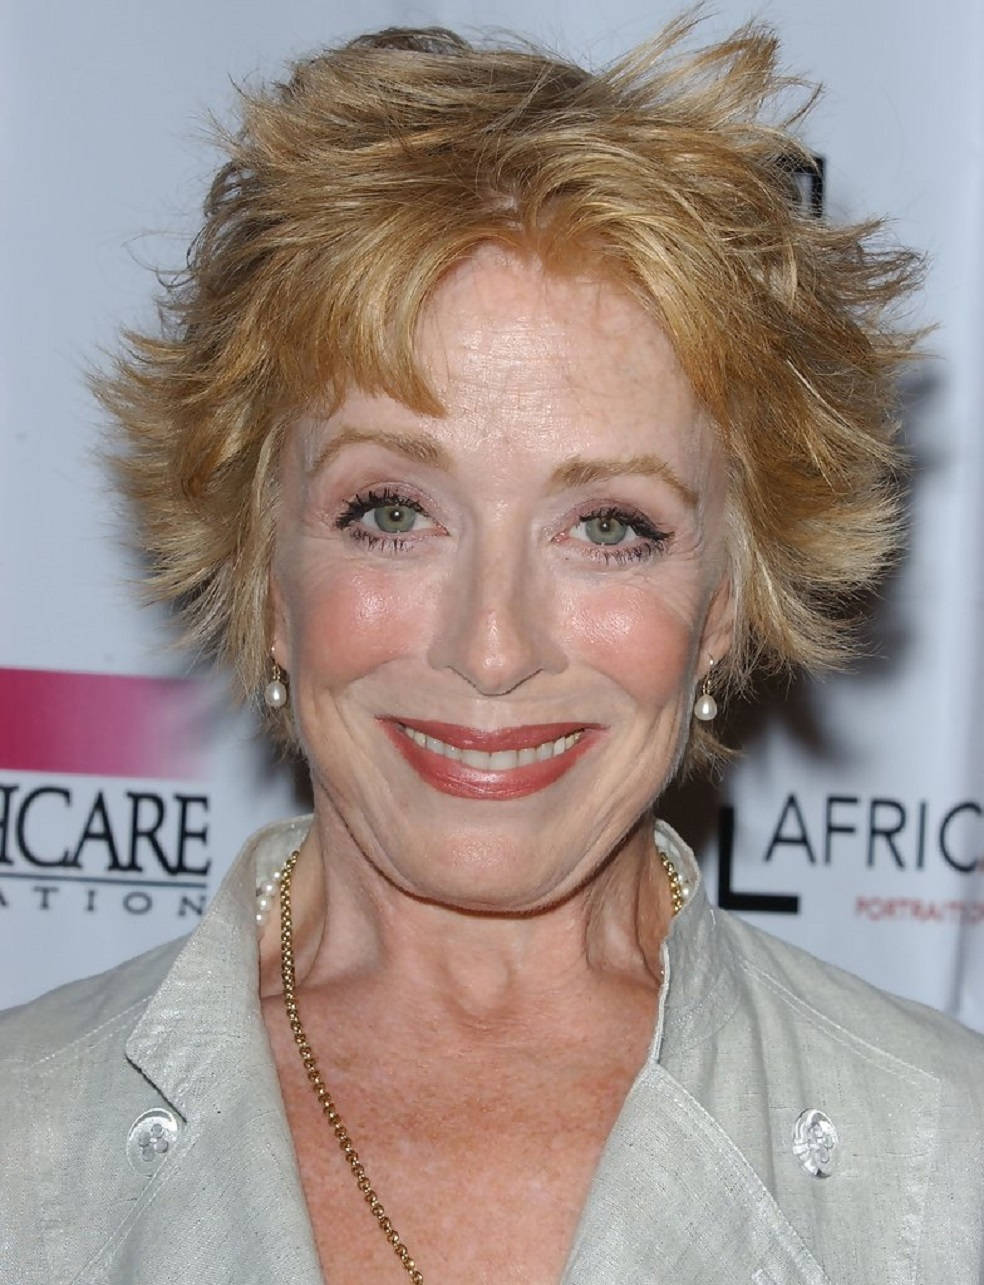 Holland Taylor Aids Healthcare Foundation Event Wallpaper